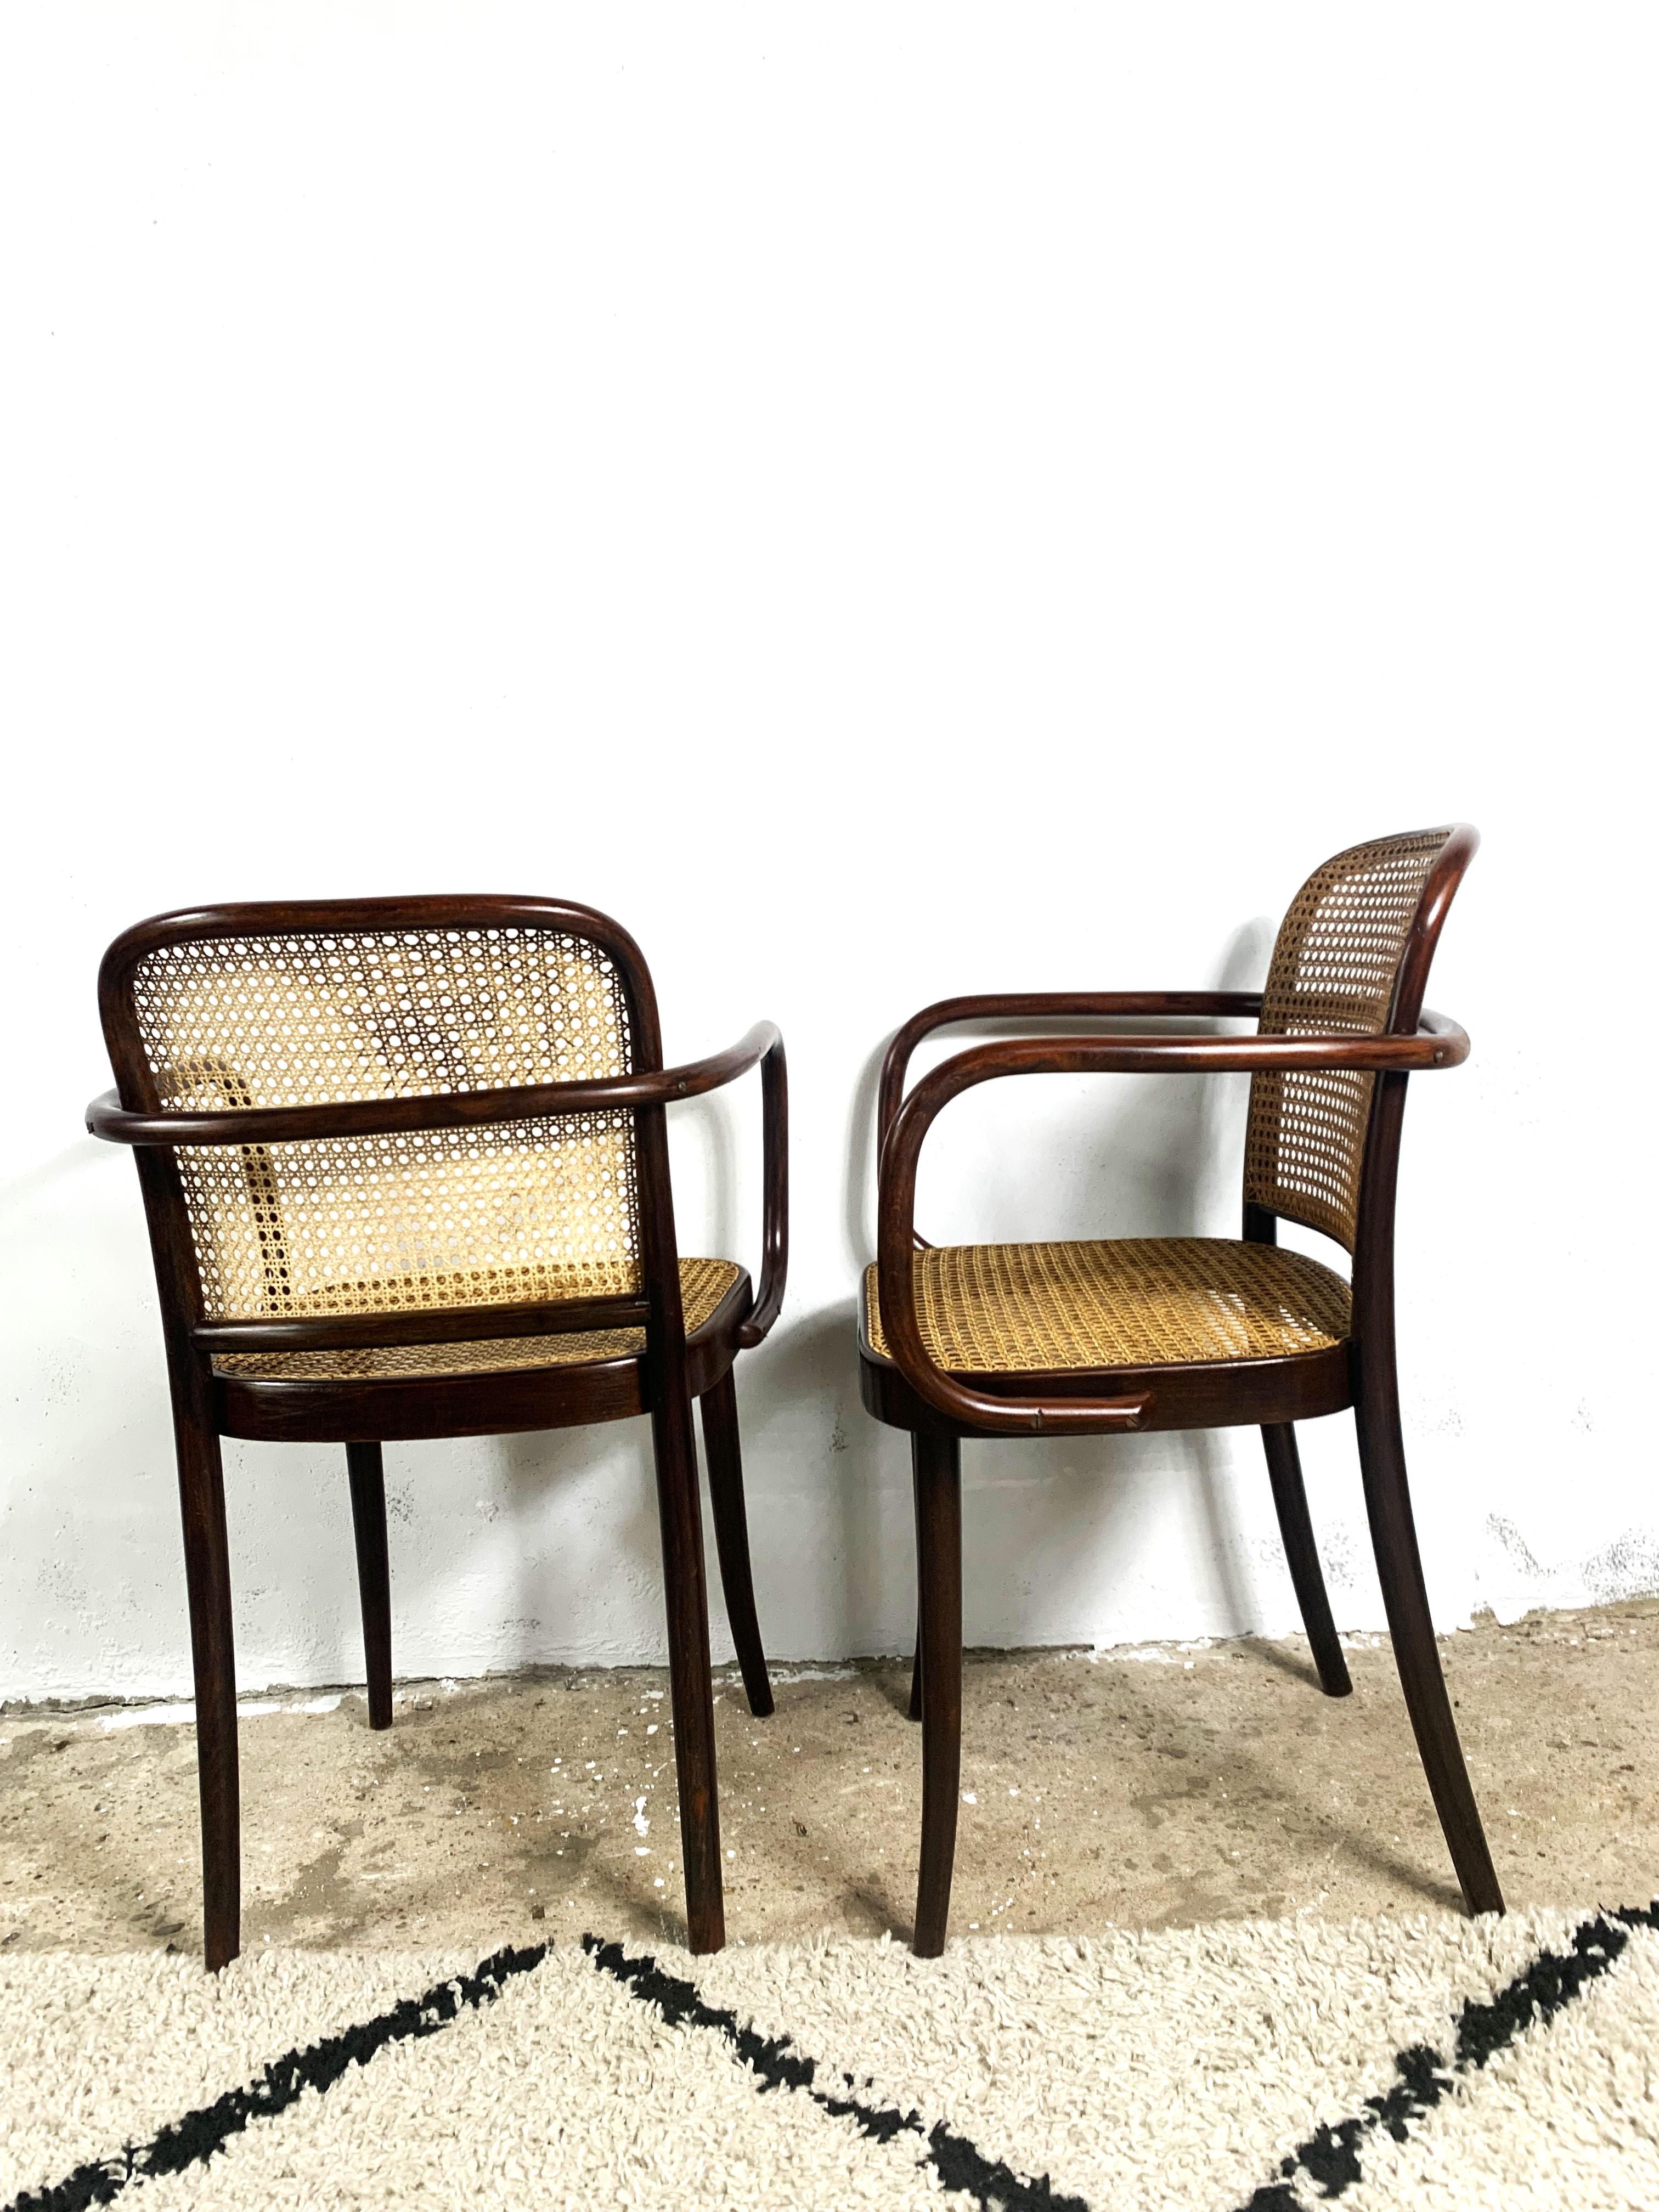 Thonet A811, 1930s, Rattan, Vintage - set of 2 For Sale 4